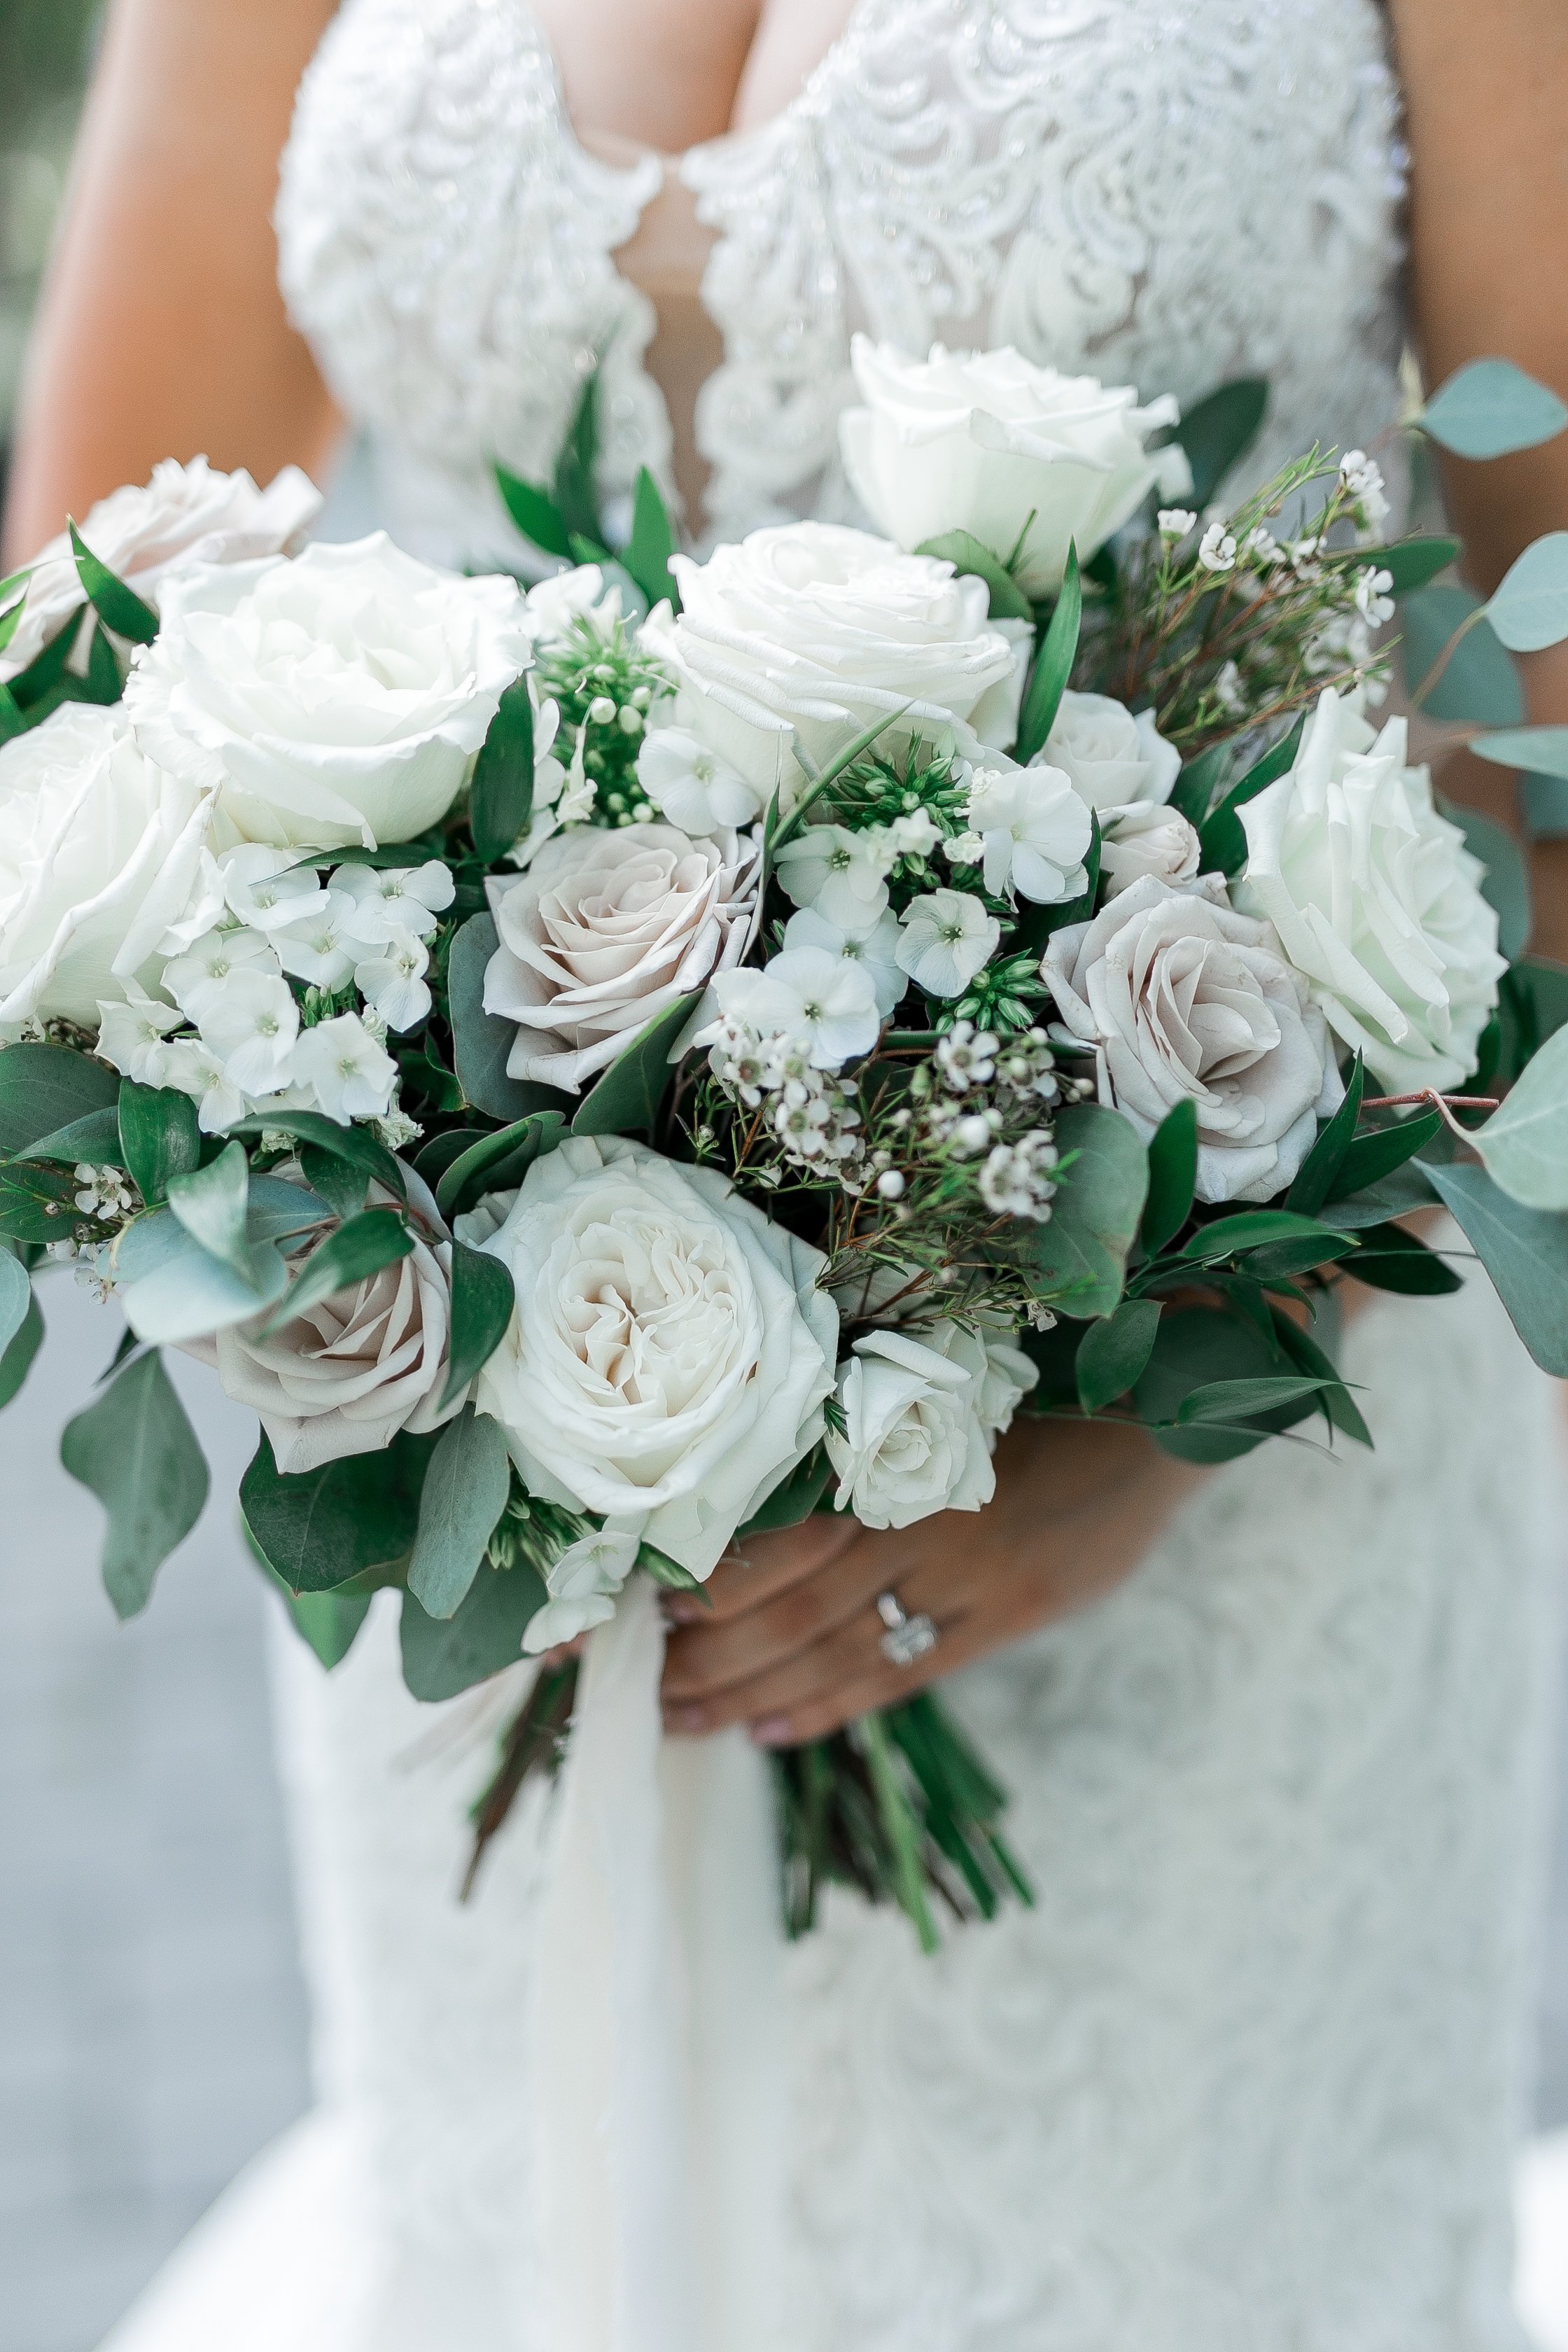 ivory-and-beau-bride-and-florals-wedding-blog-real-bride-real-wedding-savannah-wedding-southern-wedding-mackey-house-alistaire-maggie-sottero-wedding-dress-organic-natural-neutral-wedding-flowers-wedding-florist-savannah-Oct32021Wedding1405.JPG